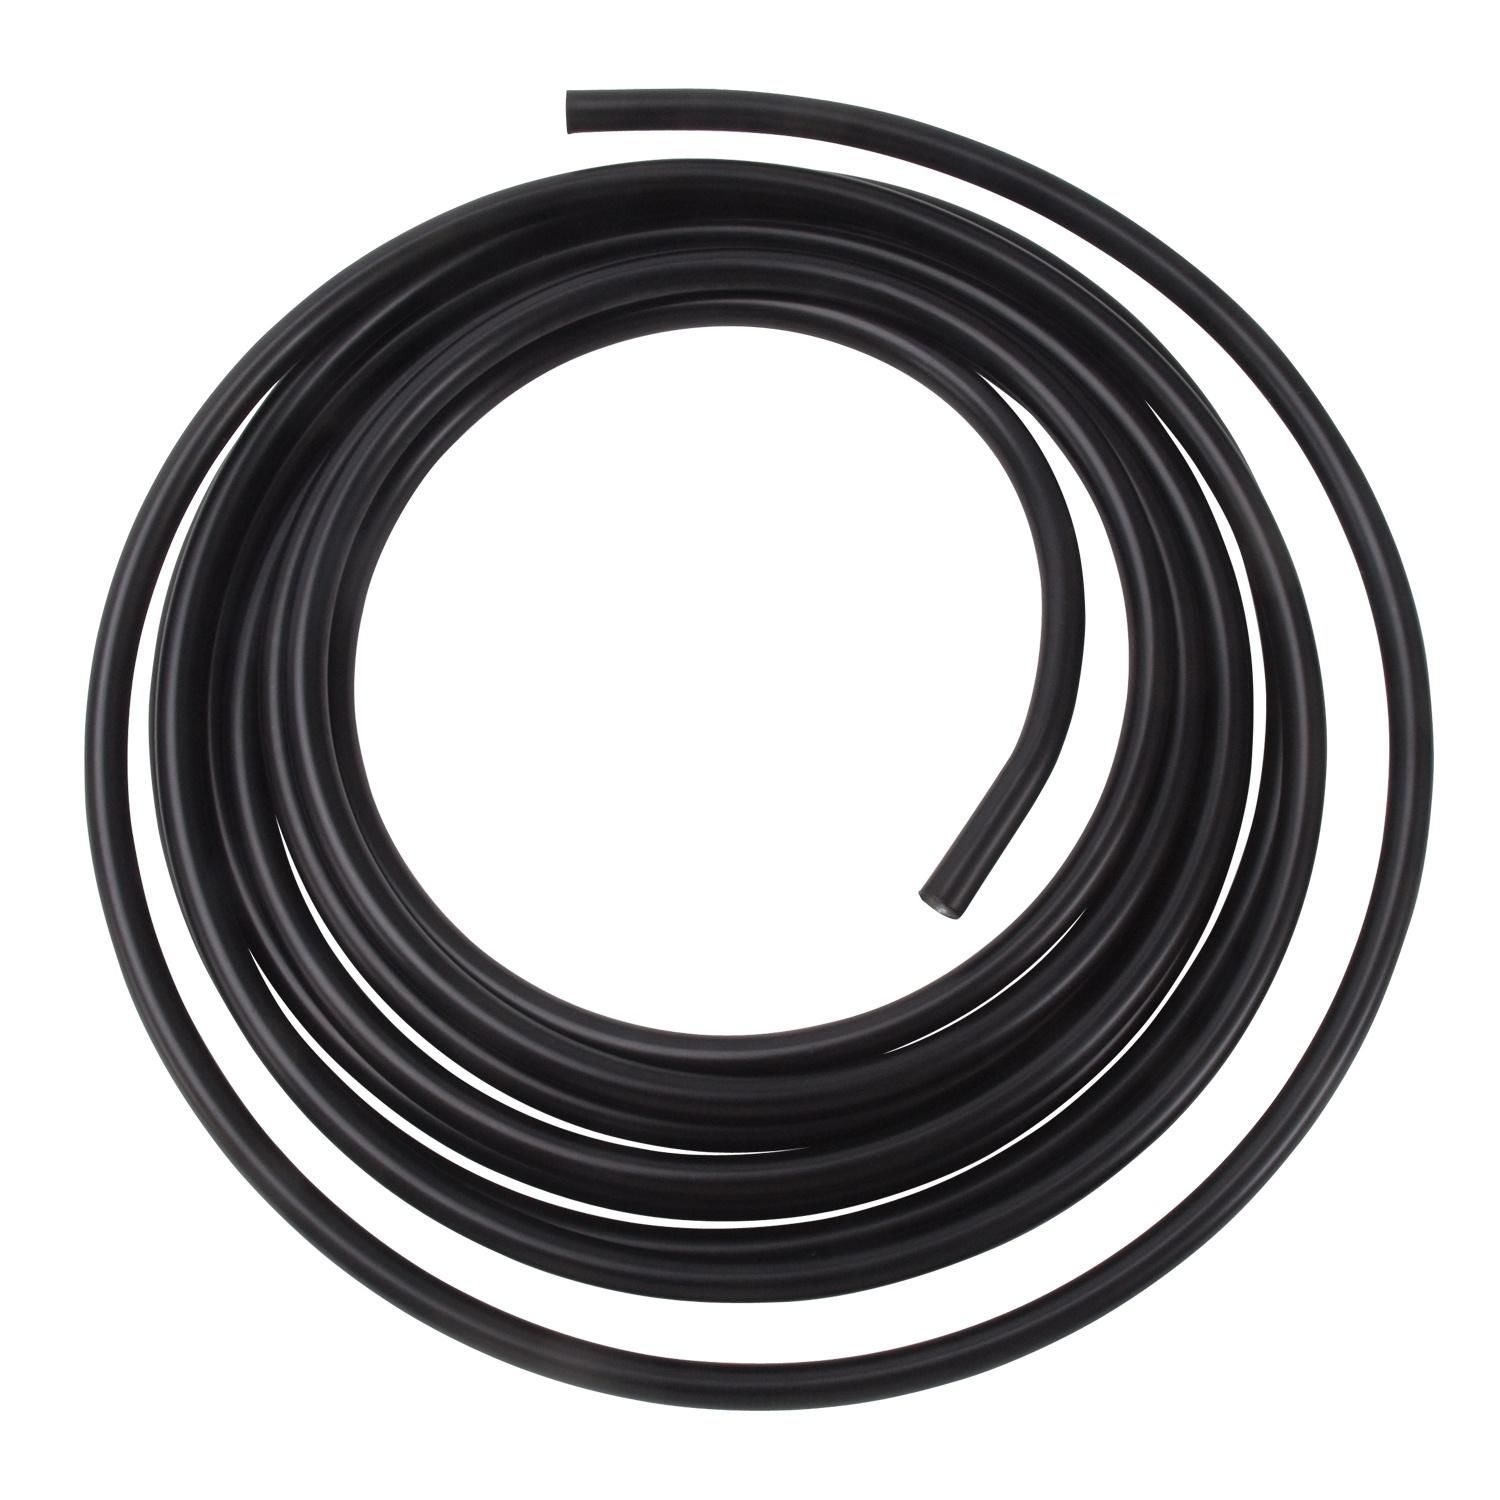 Russell 25Ft 3/8 in. Aluminum Fuel Line